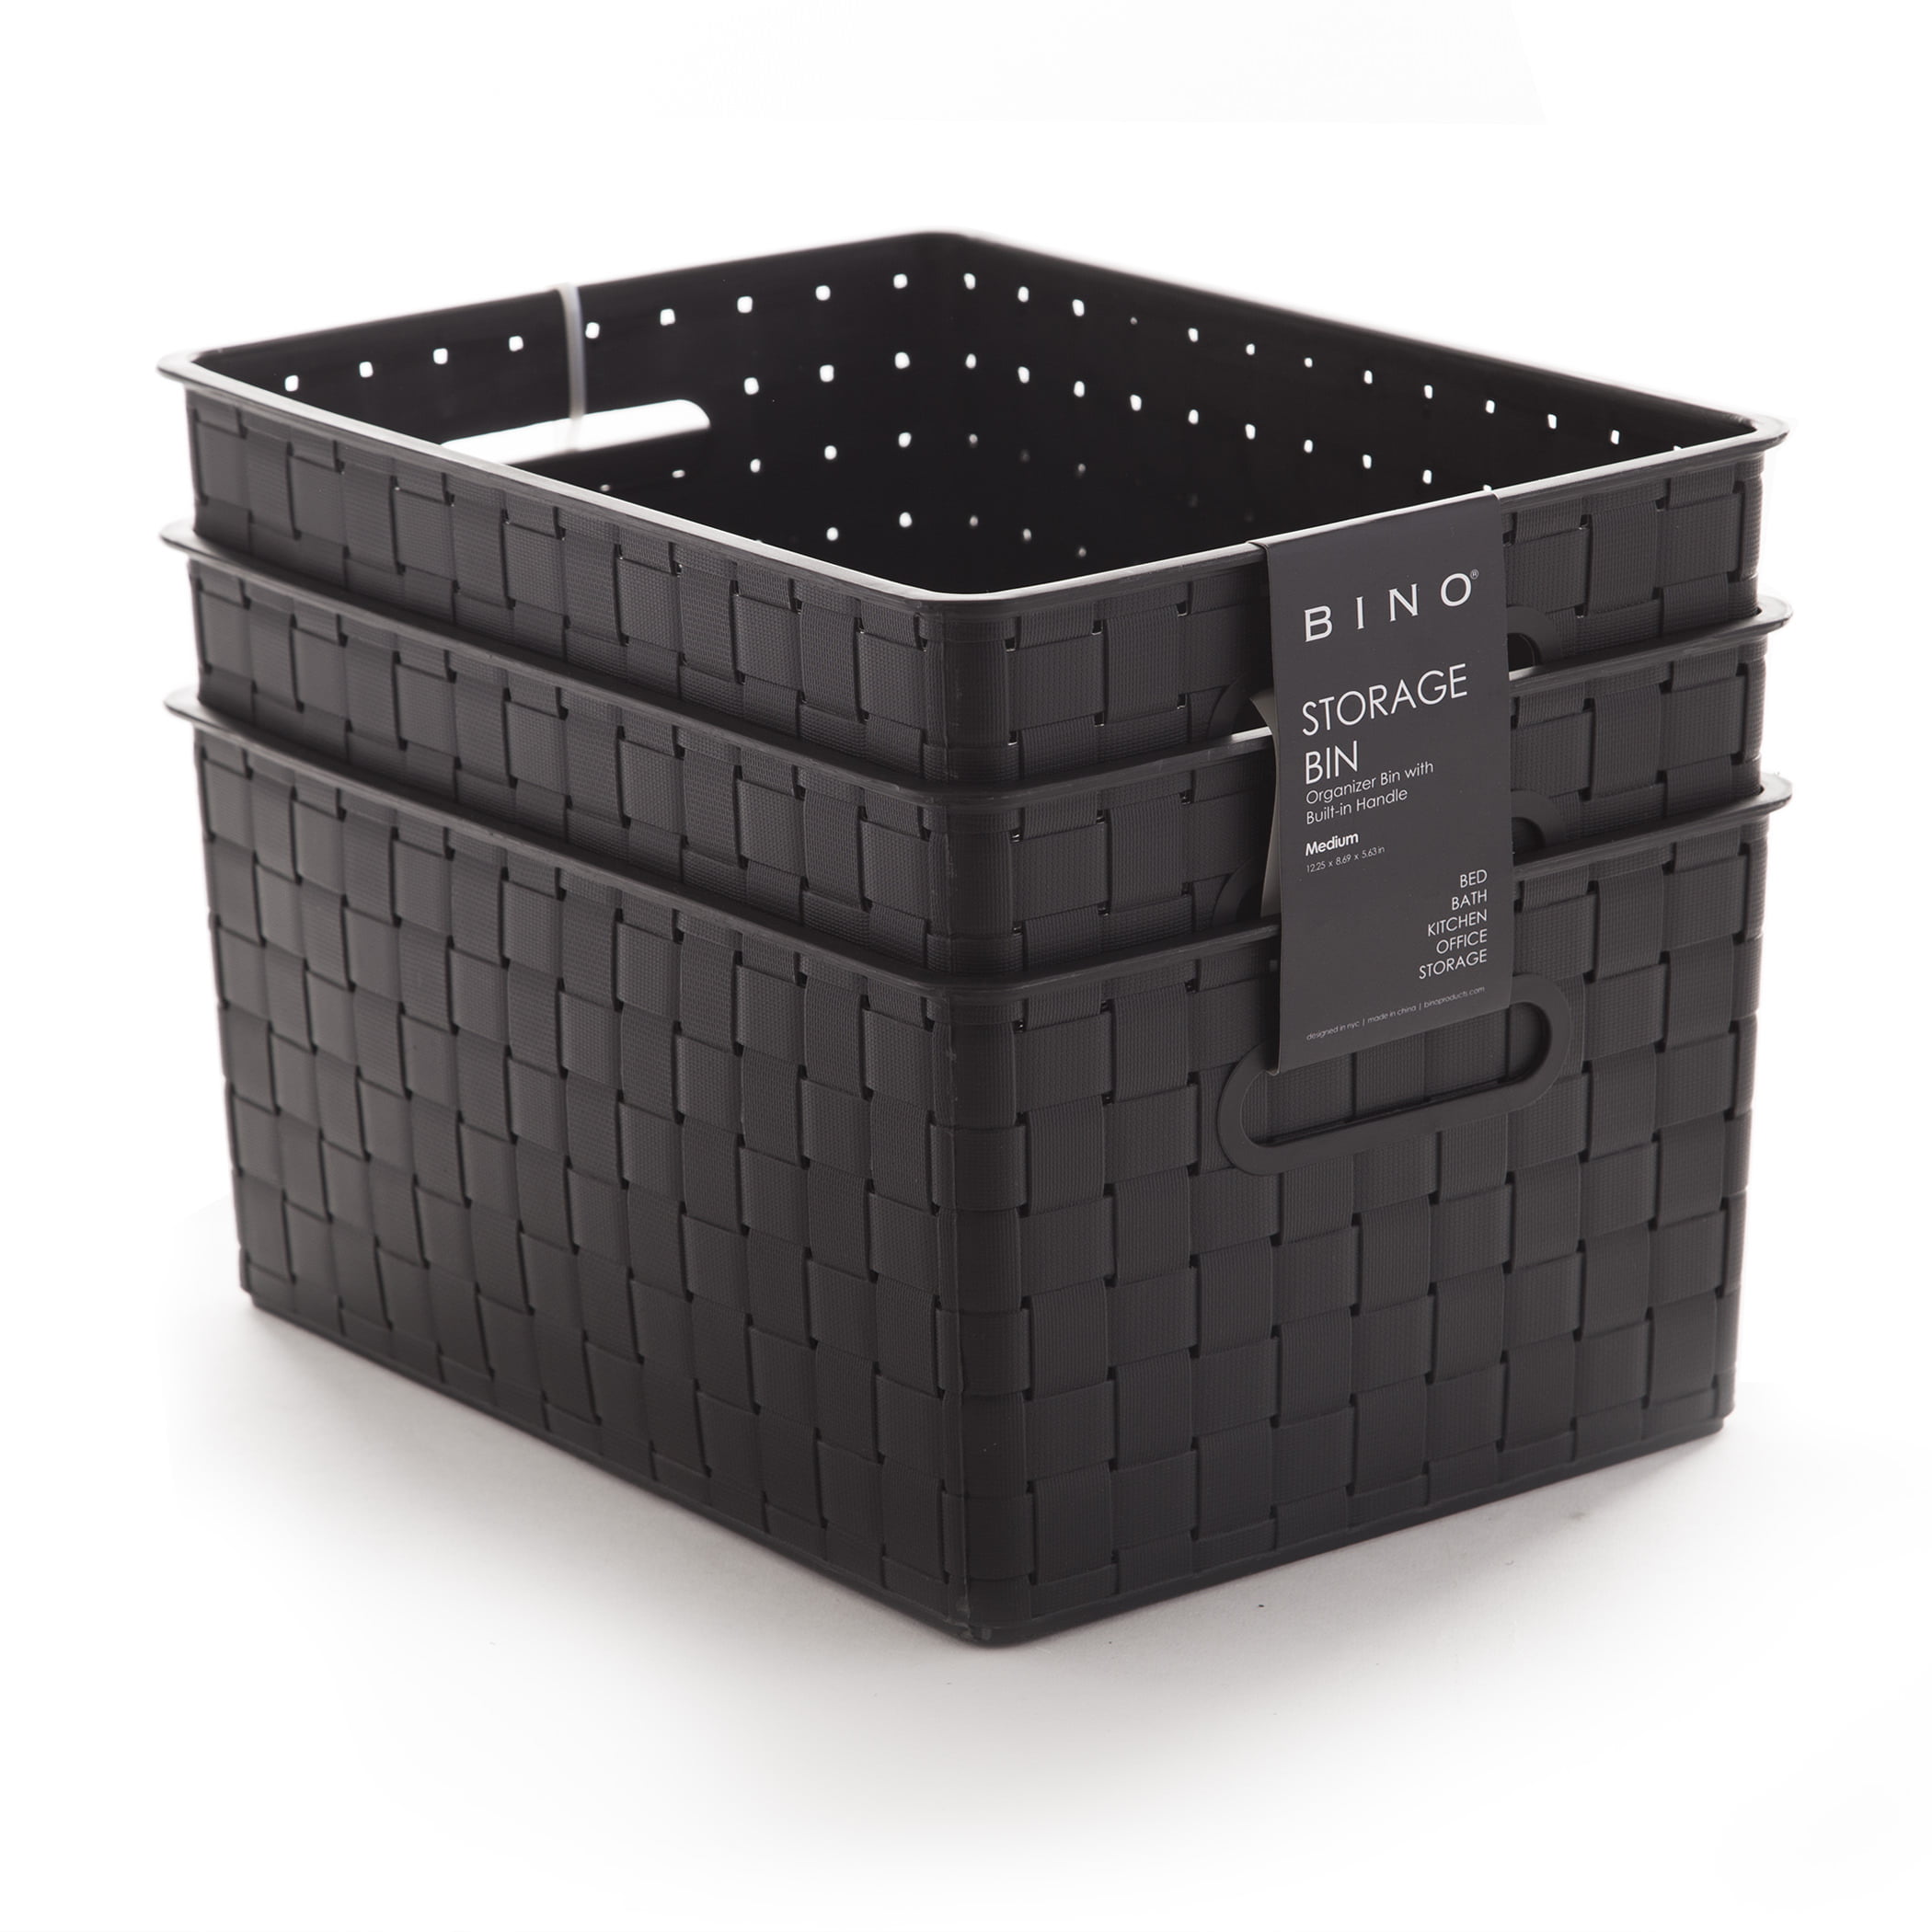 BINO Plastic Basket, Small Black, 5 Pack, The Stable Collection, Multi-Use  Storage Basket, Rectangular Cabinet Organizer, Baskets for Organizing with